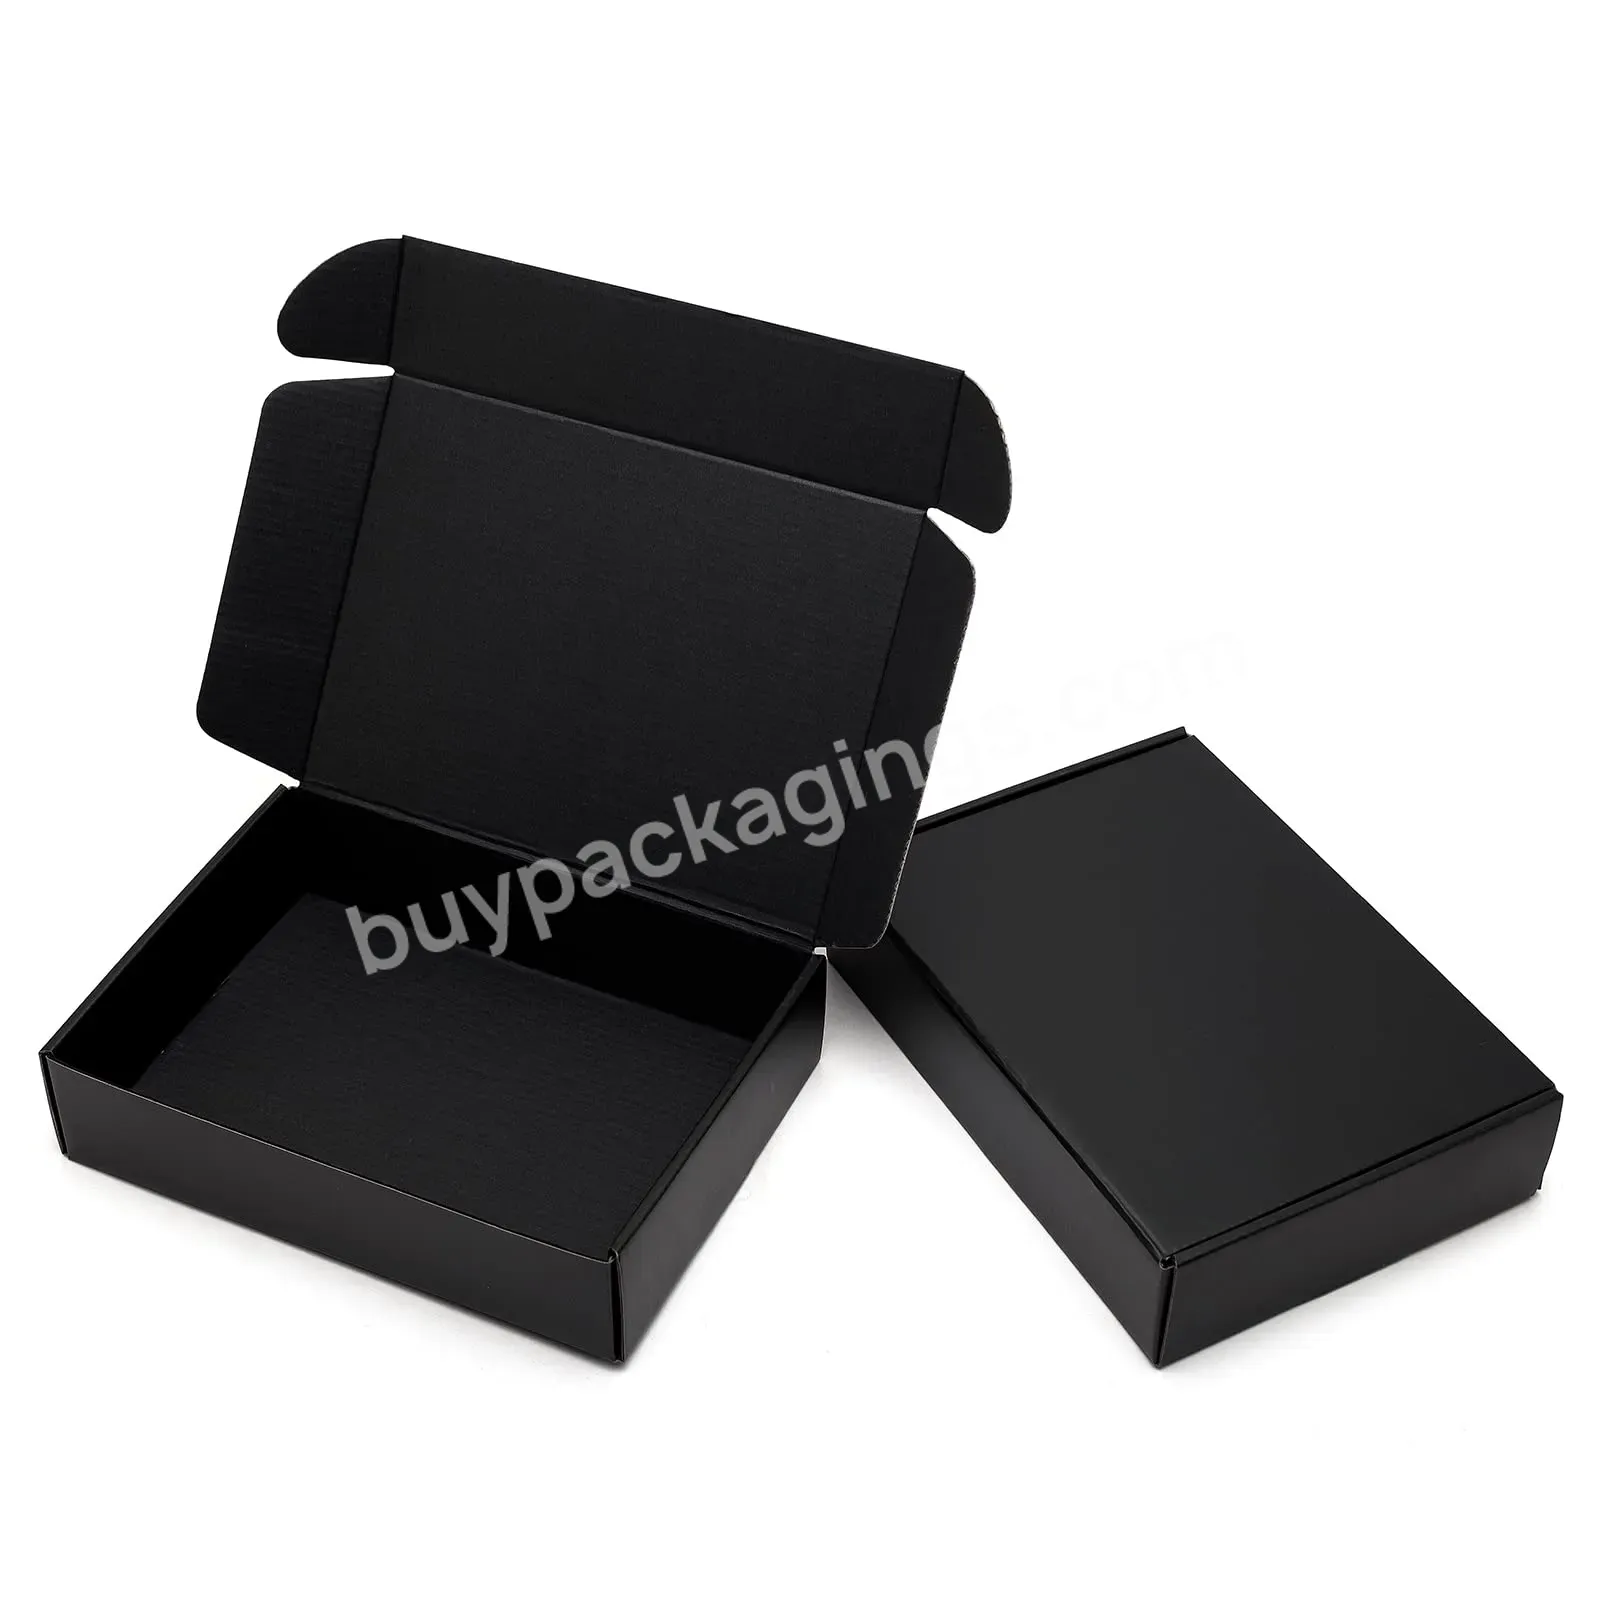 New Arrival Black Cardboard Mailer Box For Business Express Packaging Box Corrugated Mailing Boxes